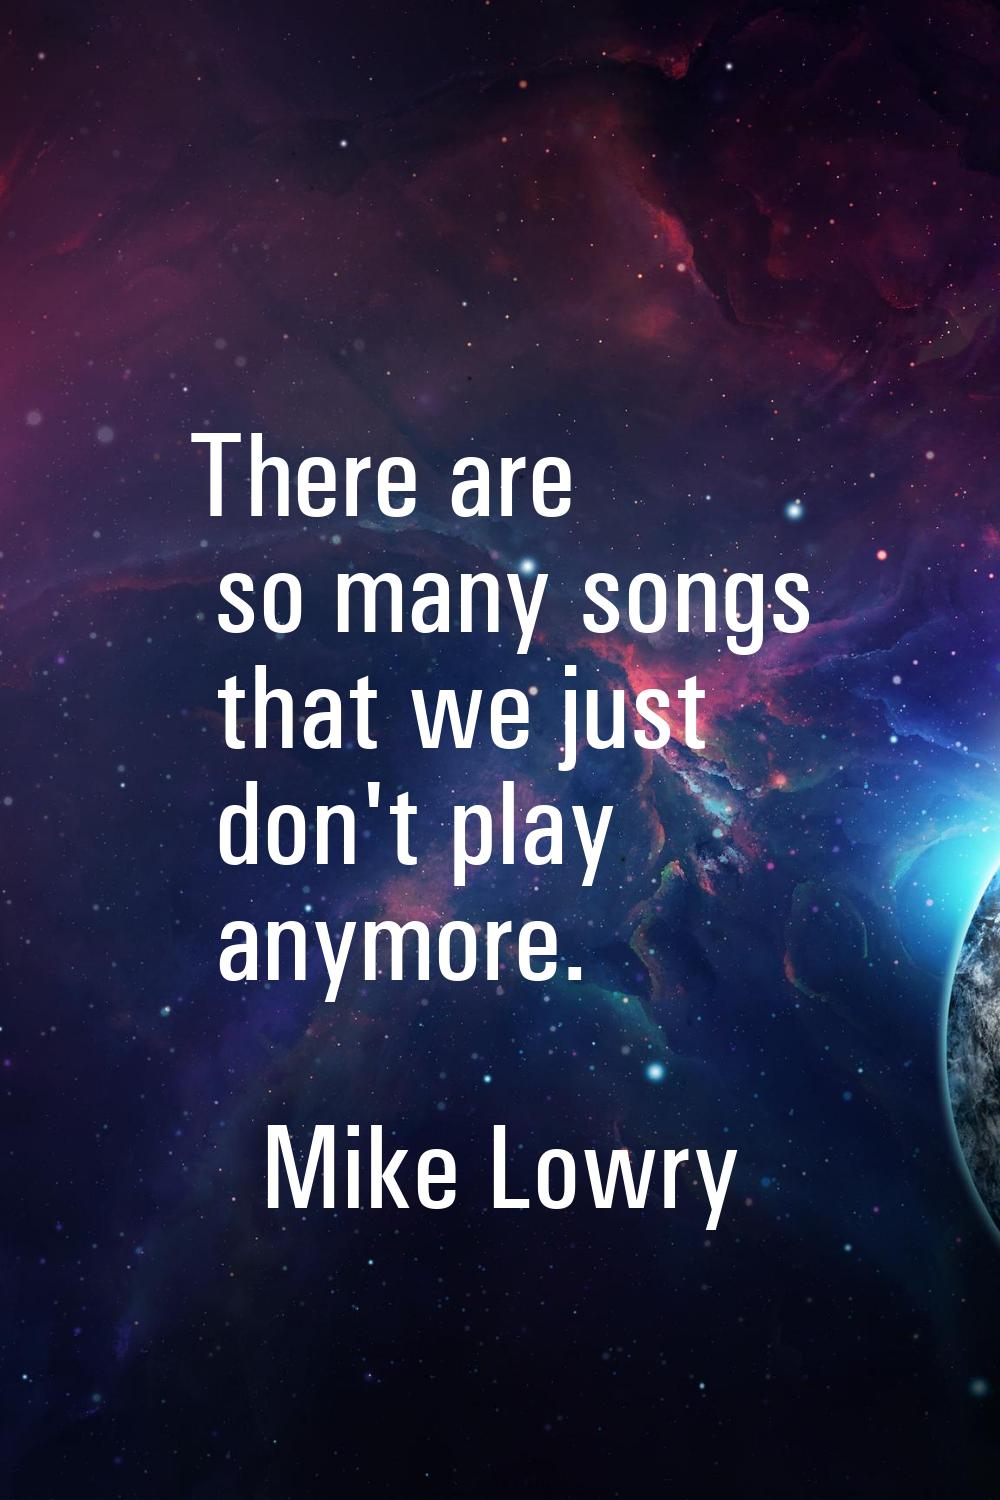 There are so many songs that we just don't play anymore.